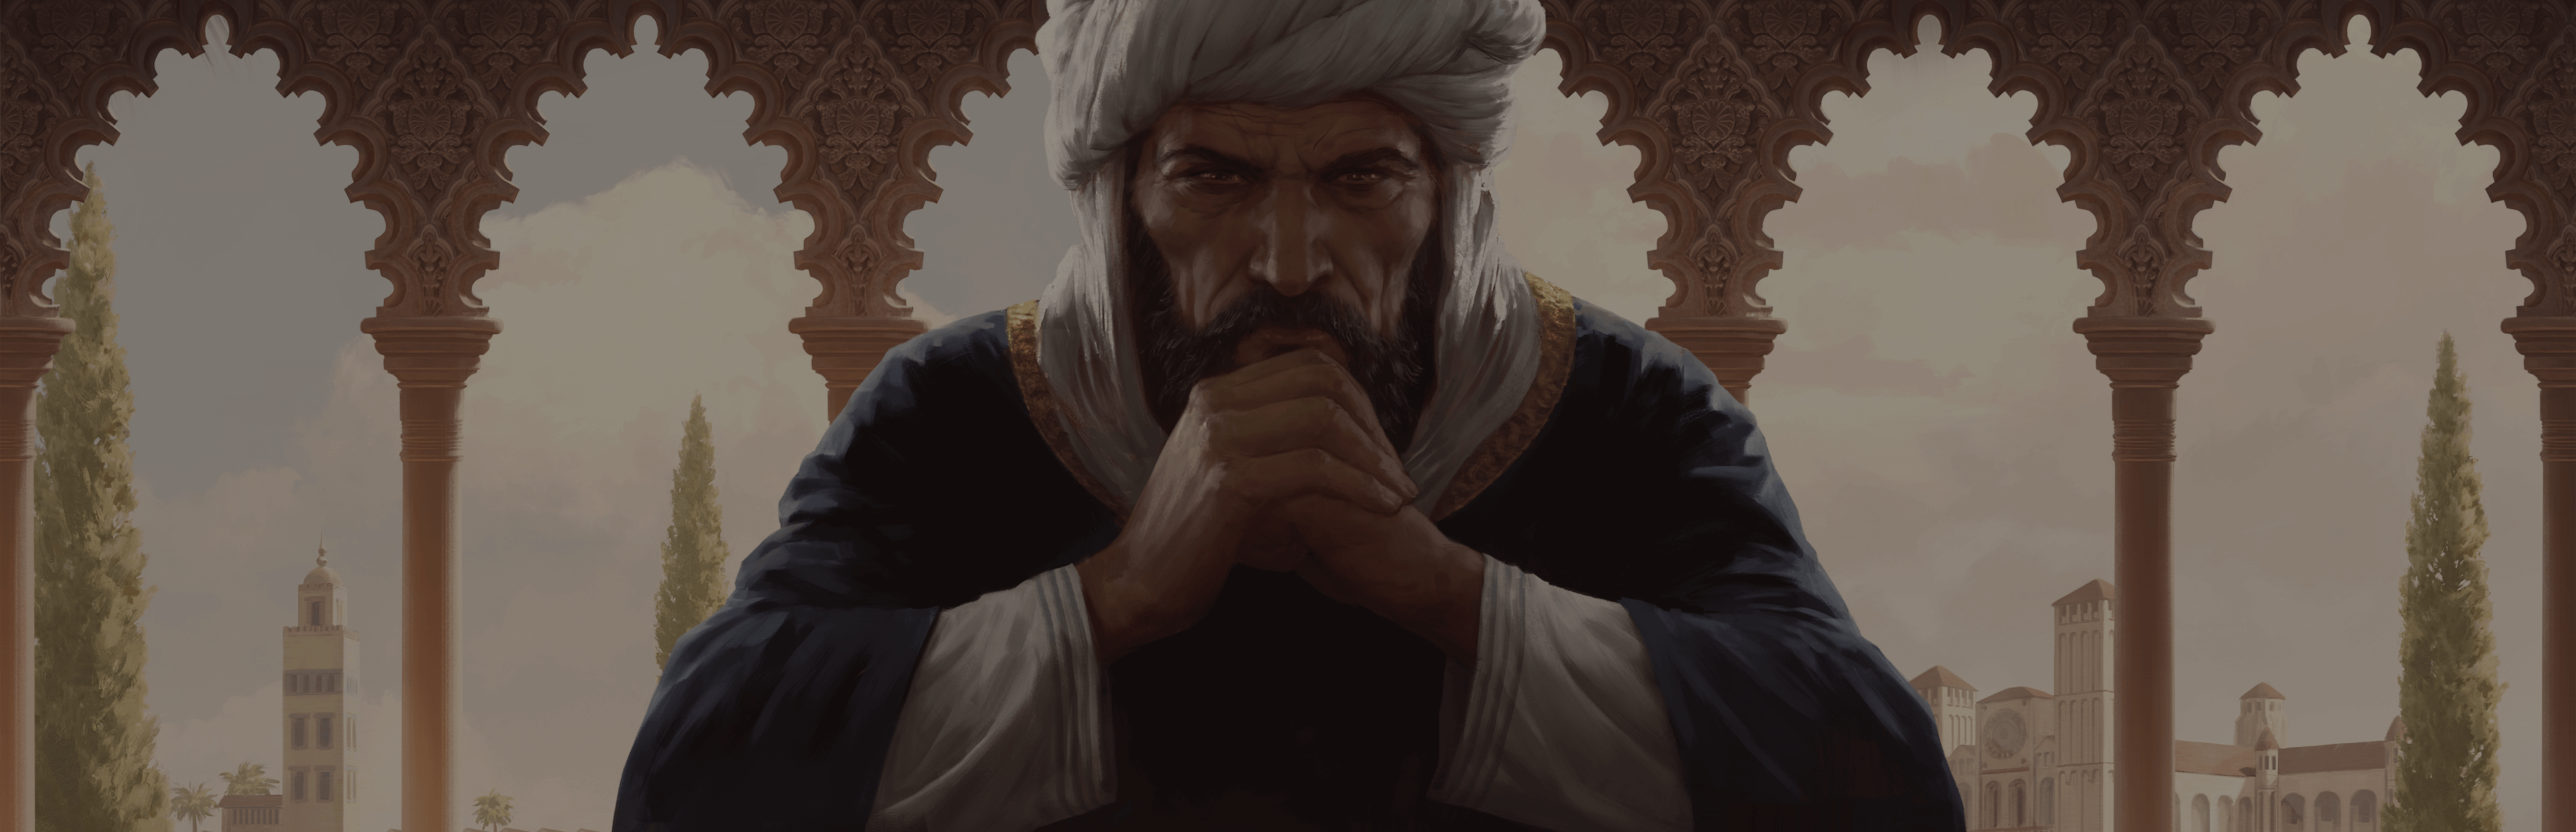 New Berber Portraits in 'Holy Fury' DLC?(Found on the Paradox Forums) :  r/CrusaderKings